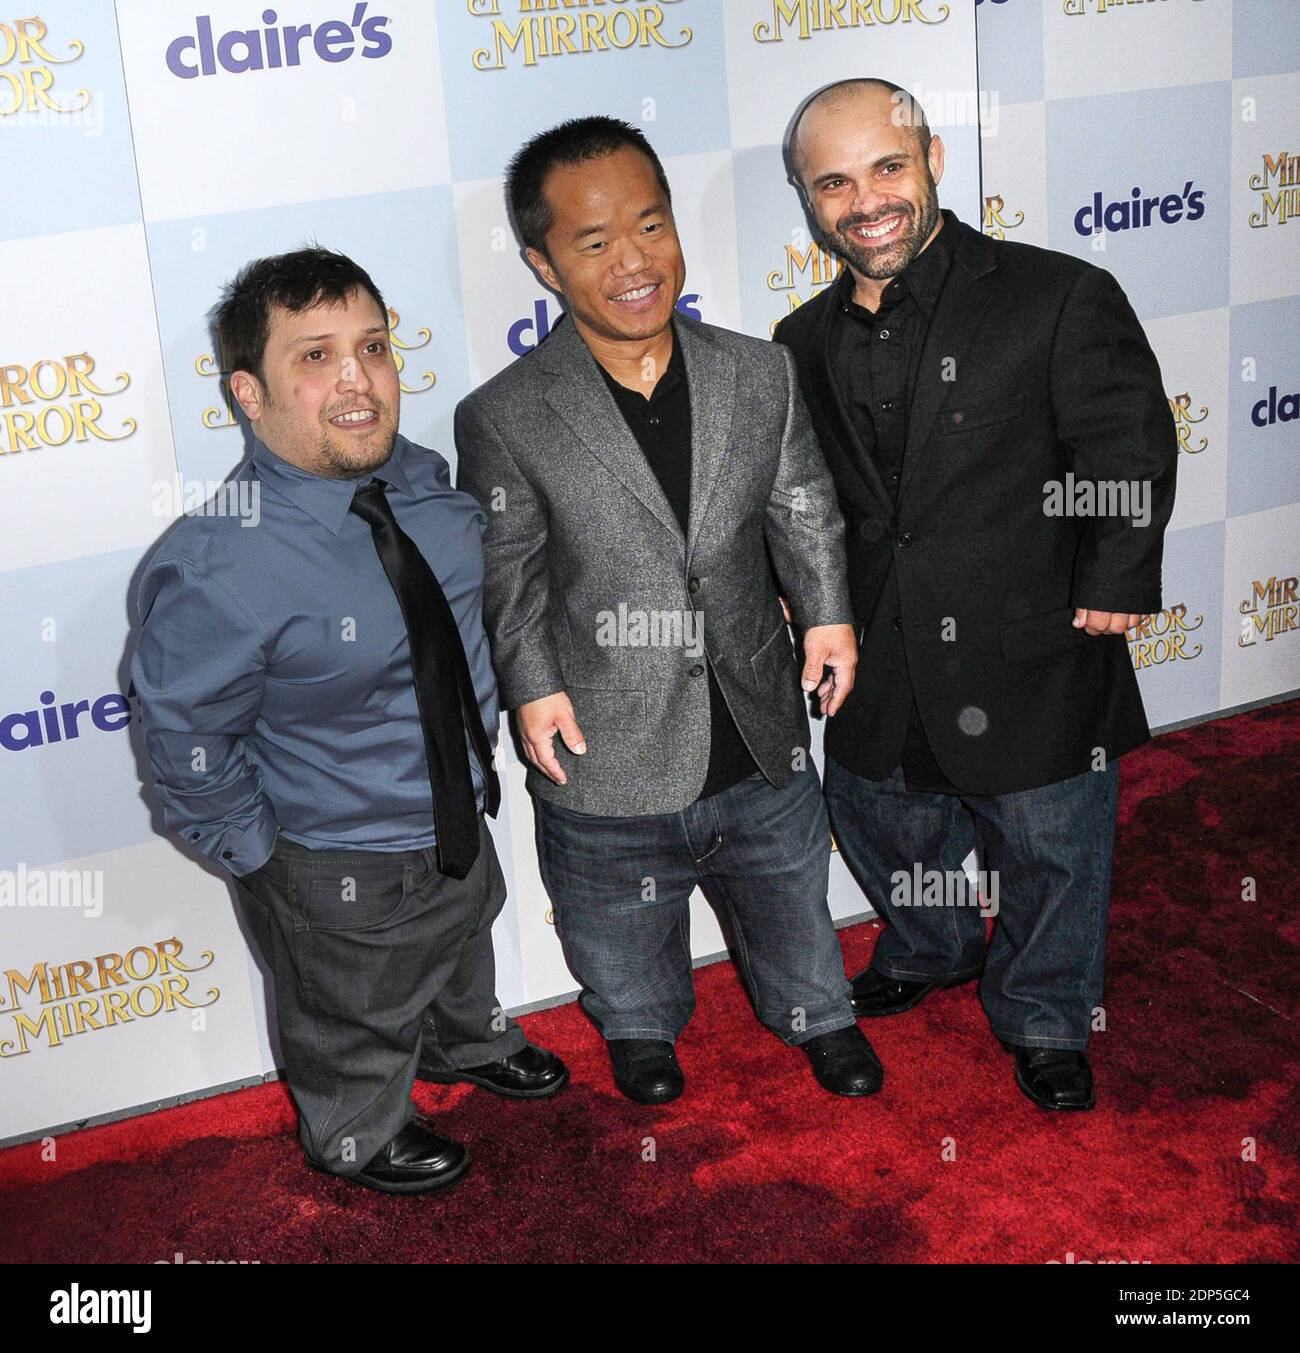 Joey Gnoffo, Ronald Lee Clark,Sebastian Saraceno at Mirror Mirror premiere  at Grauman's Chinese Theatre in Hollywood, Ca on March 17, 2012 Stock Photo  - Alamy